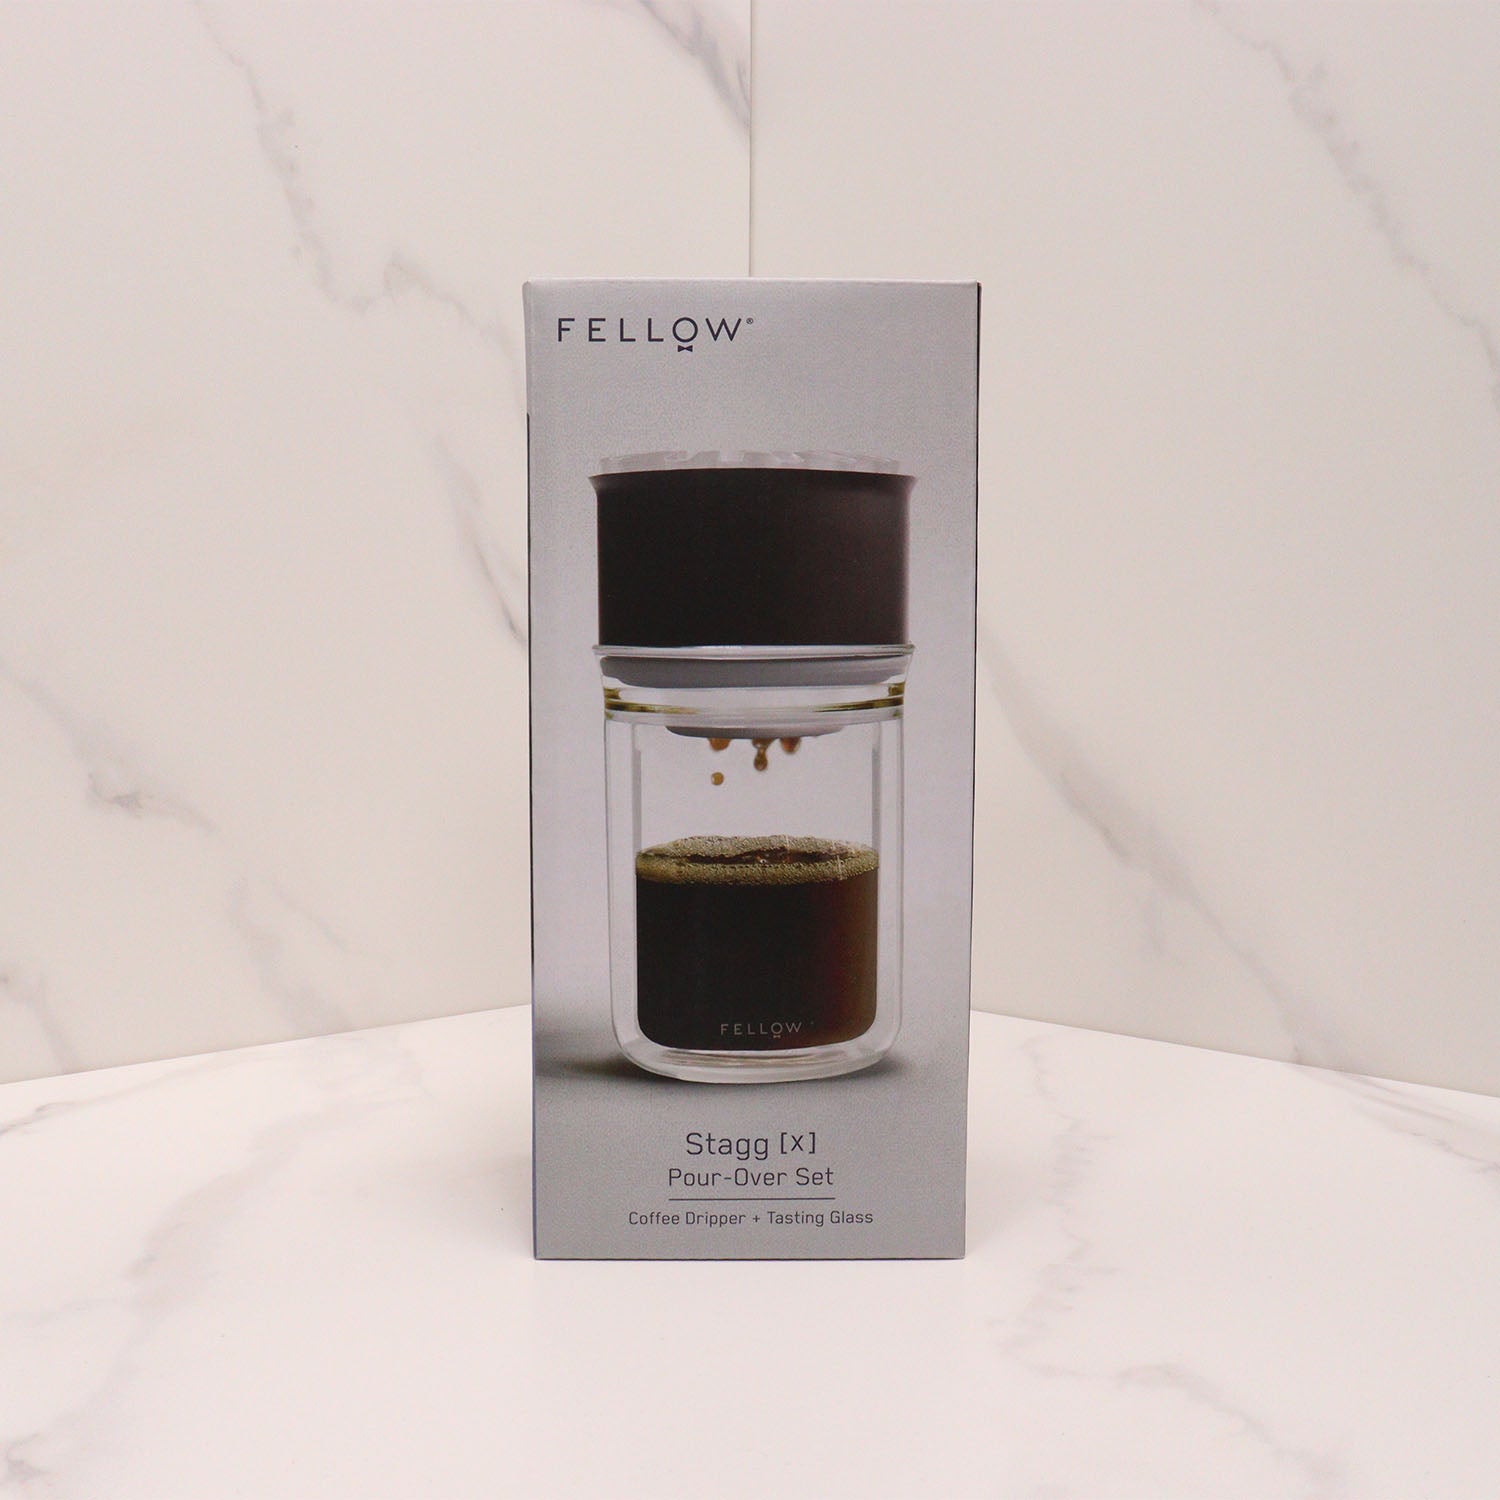 Fellow Stagg [X] Pour Over Set